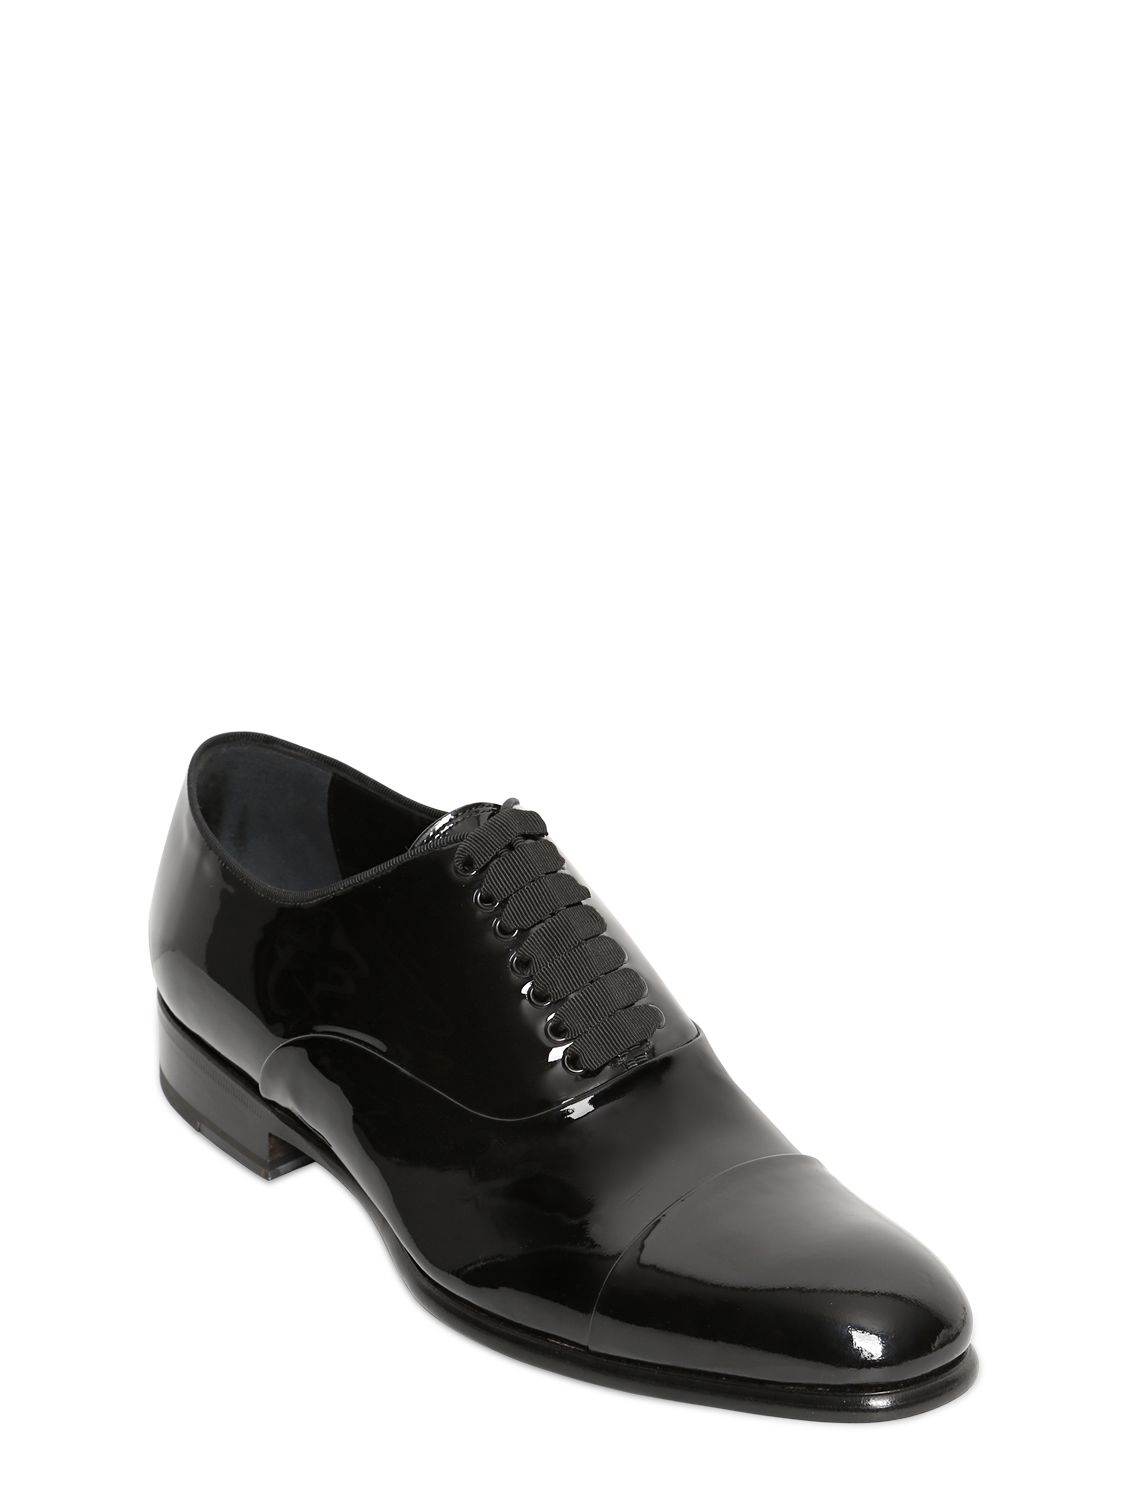 Lyst - Max Verre Patent Leather Oxford Lace-Up Shoes in Black for Men